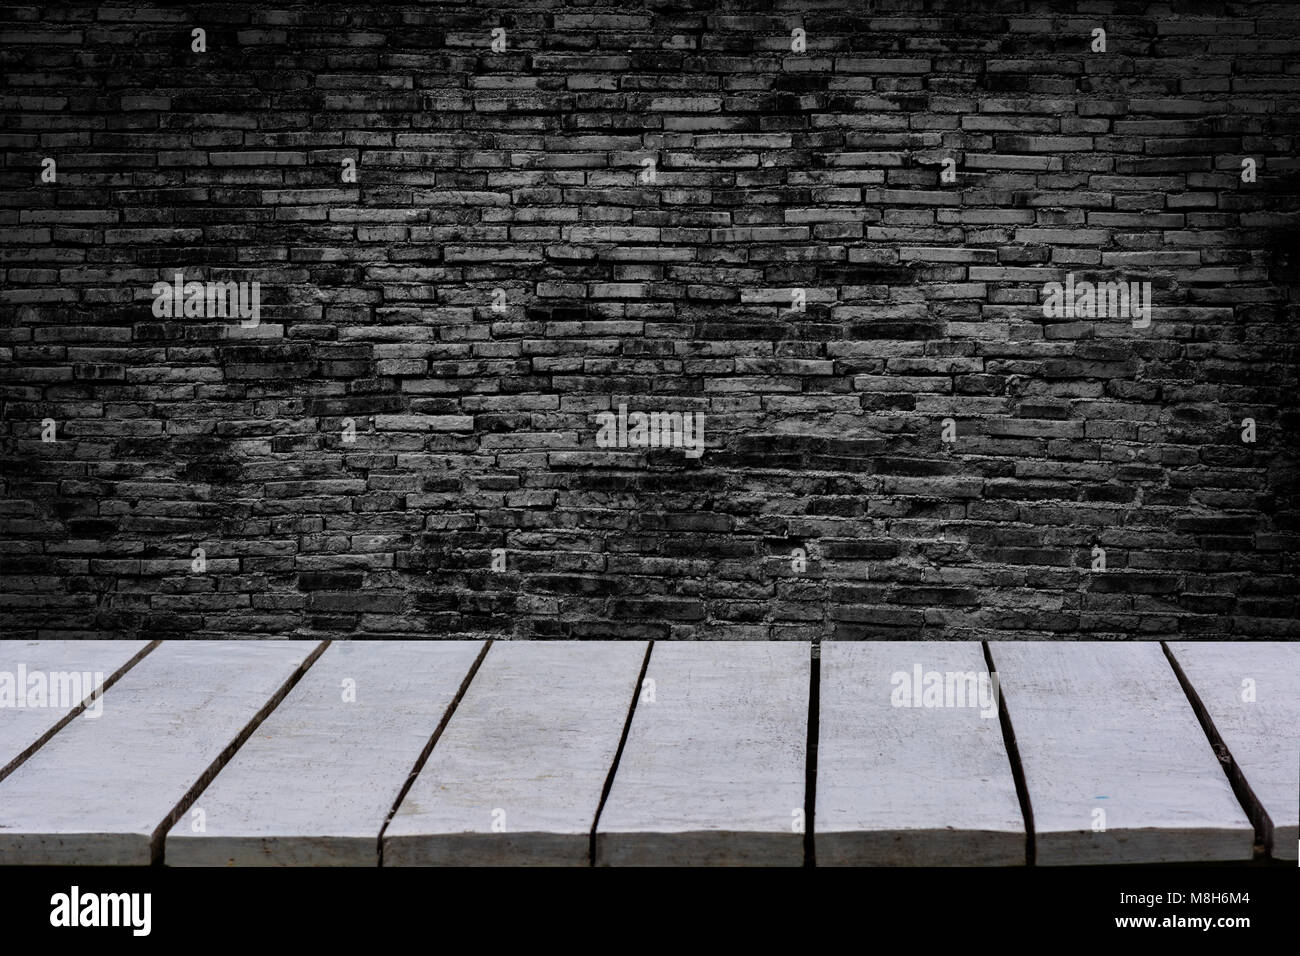 table empty The background is brick wall Empty top wooden shelves and stone wall background Stock Photo